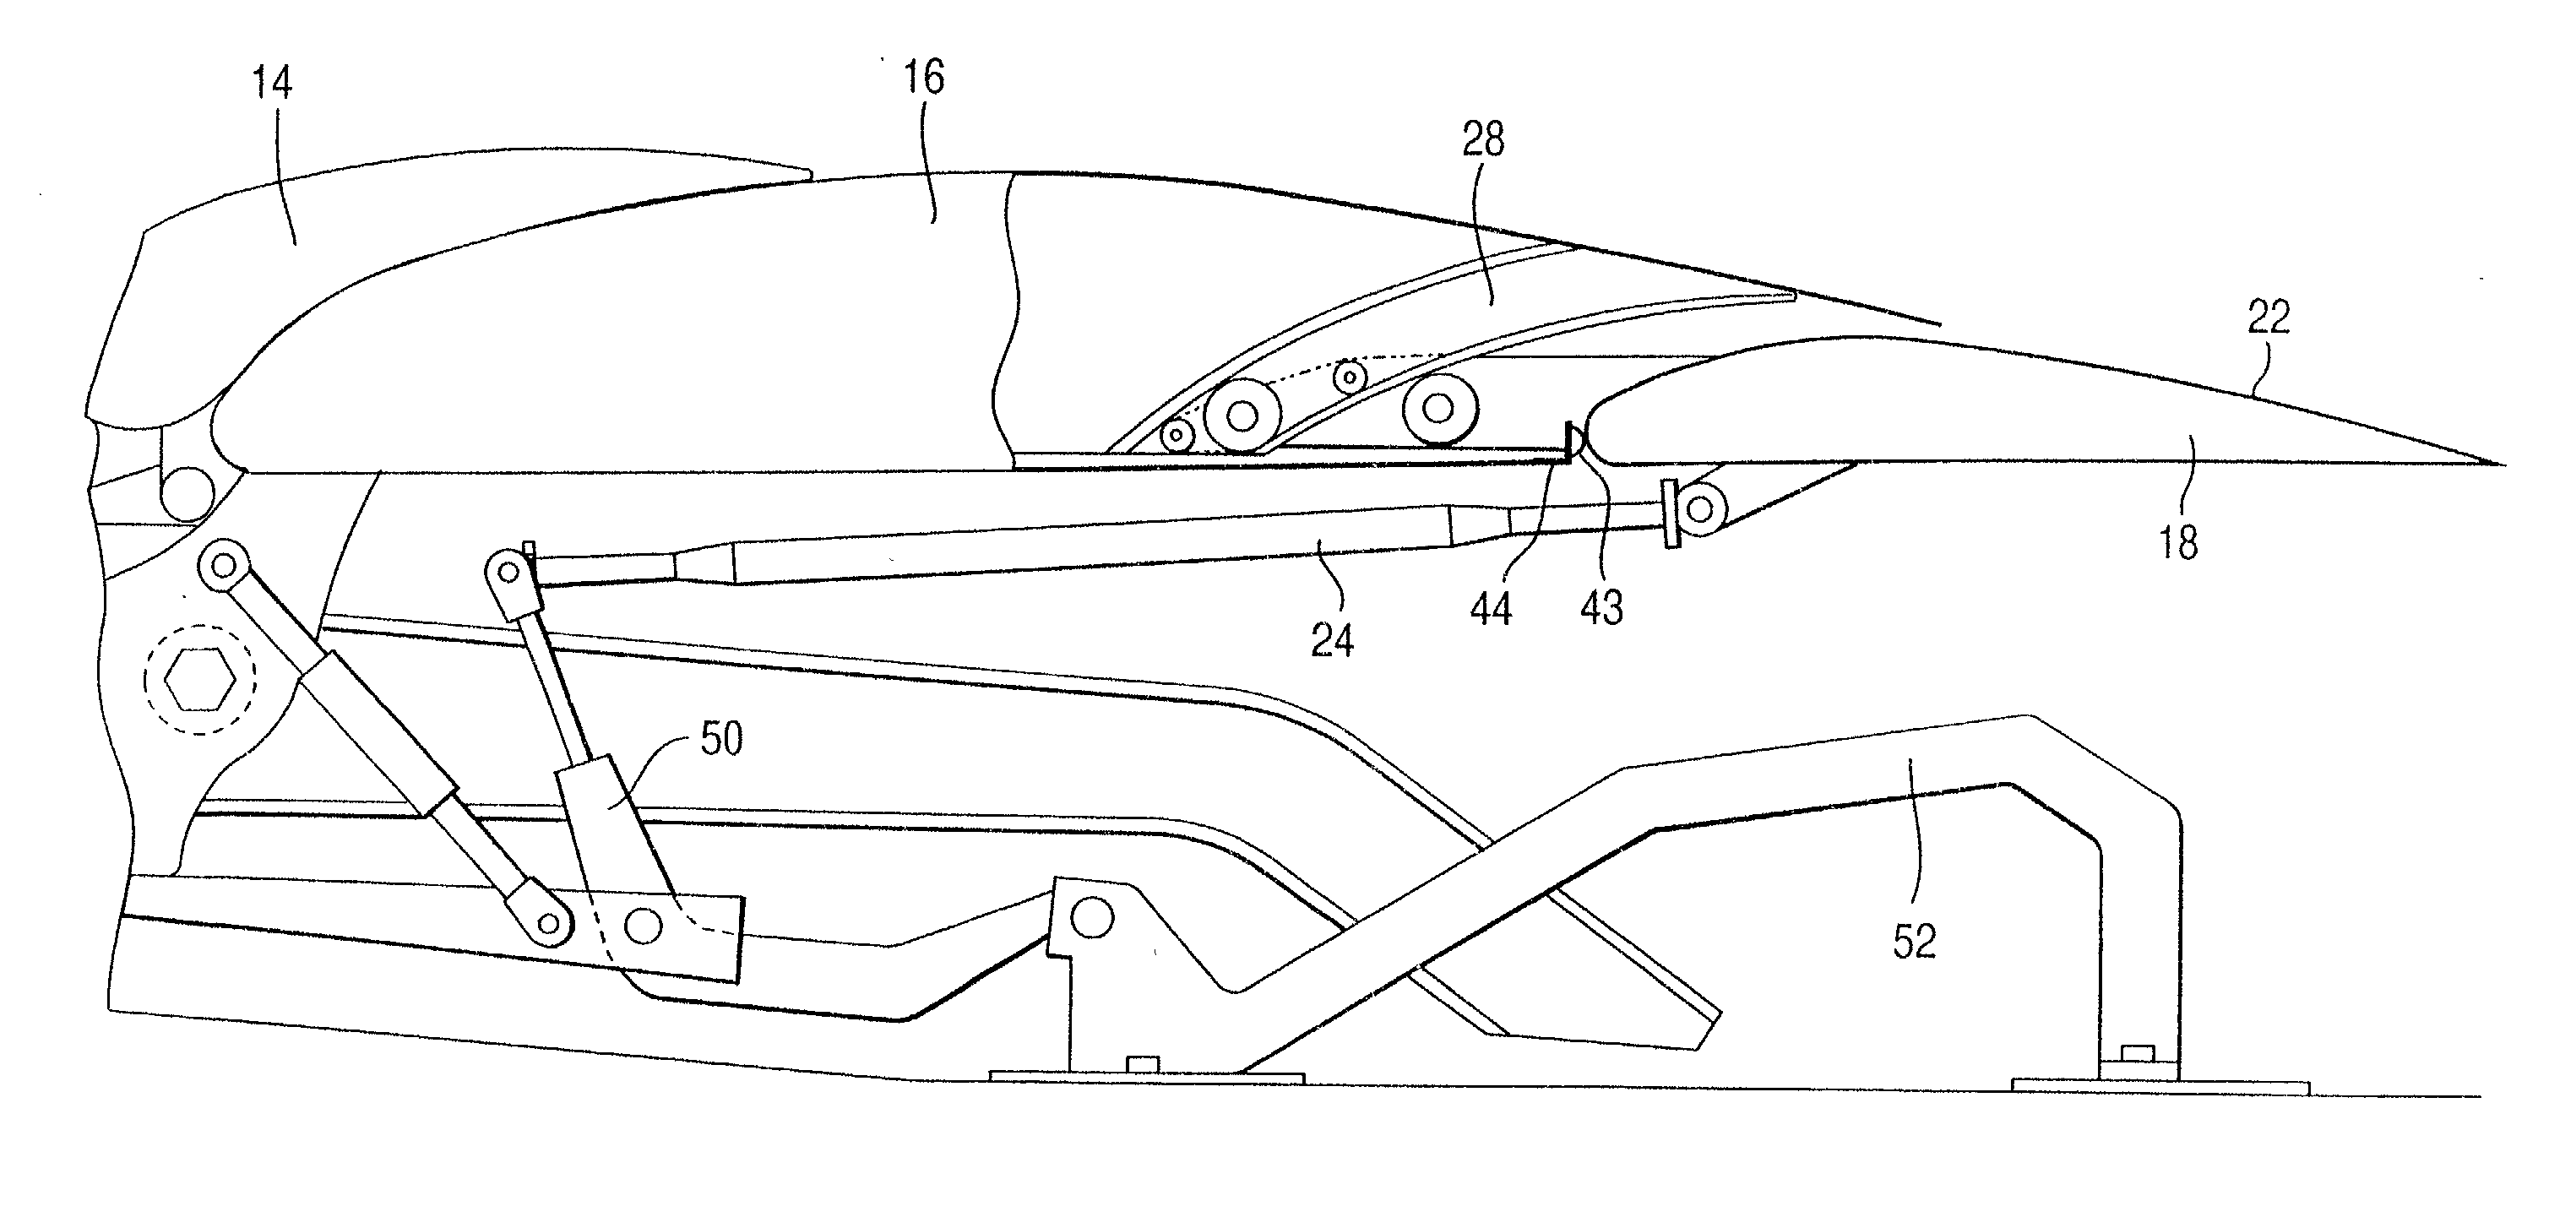 Method for reducing fuel consumption in aircraft